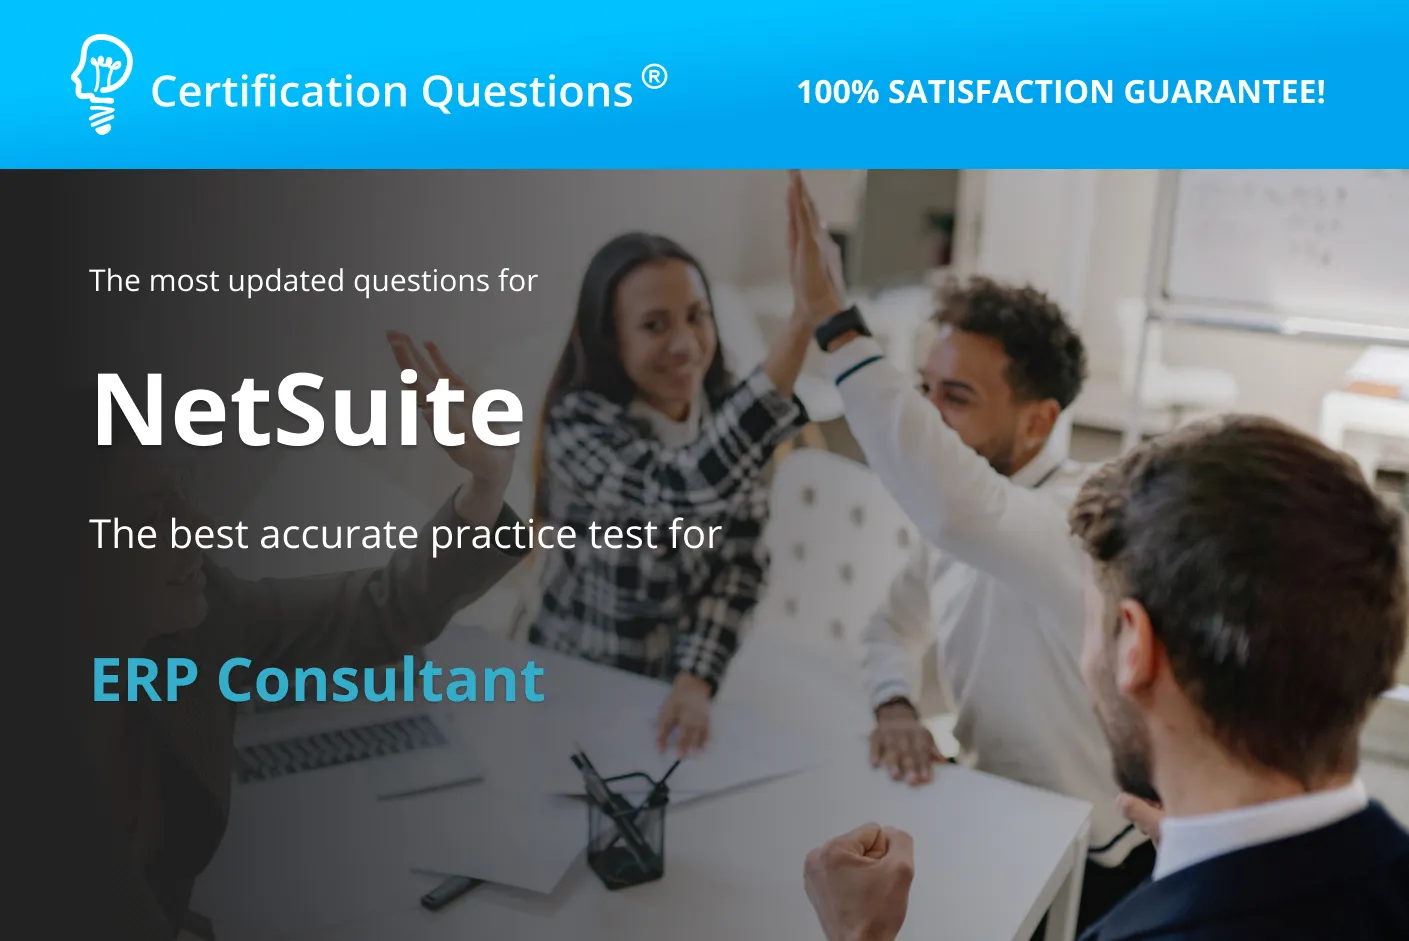 This image is related to the NetSuite ERP consultant practice test in the United States of America.